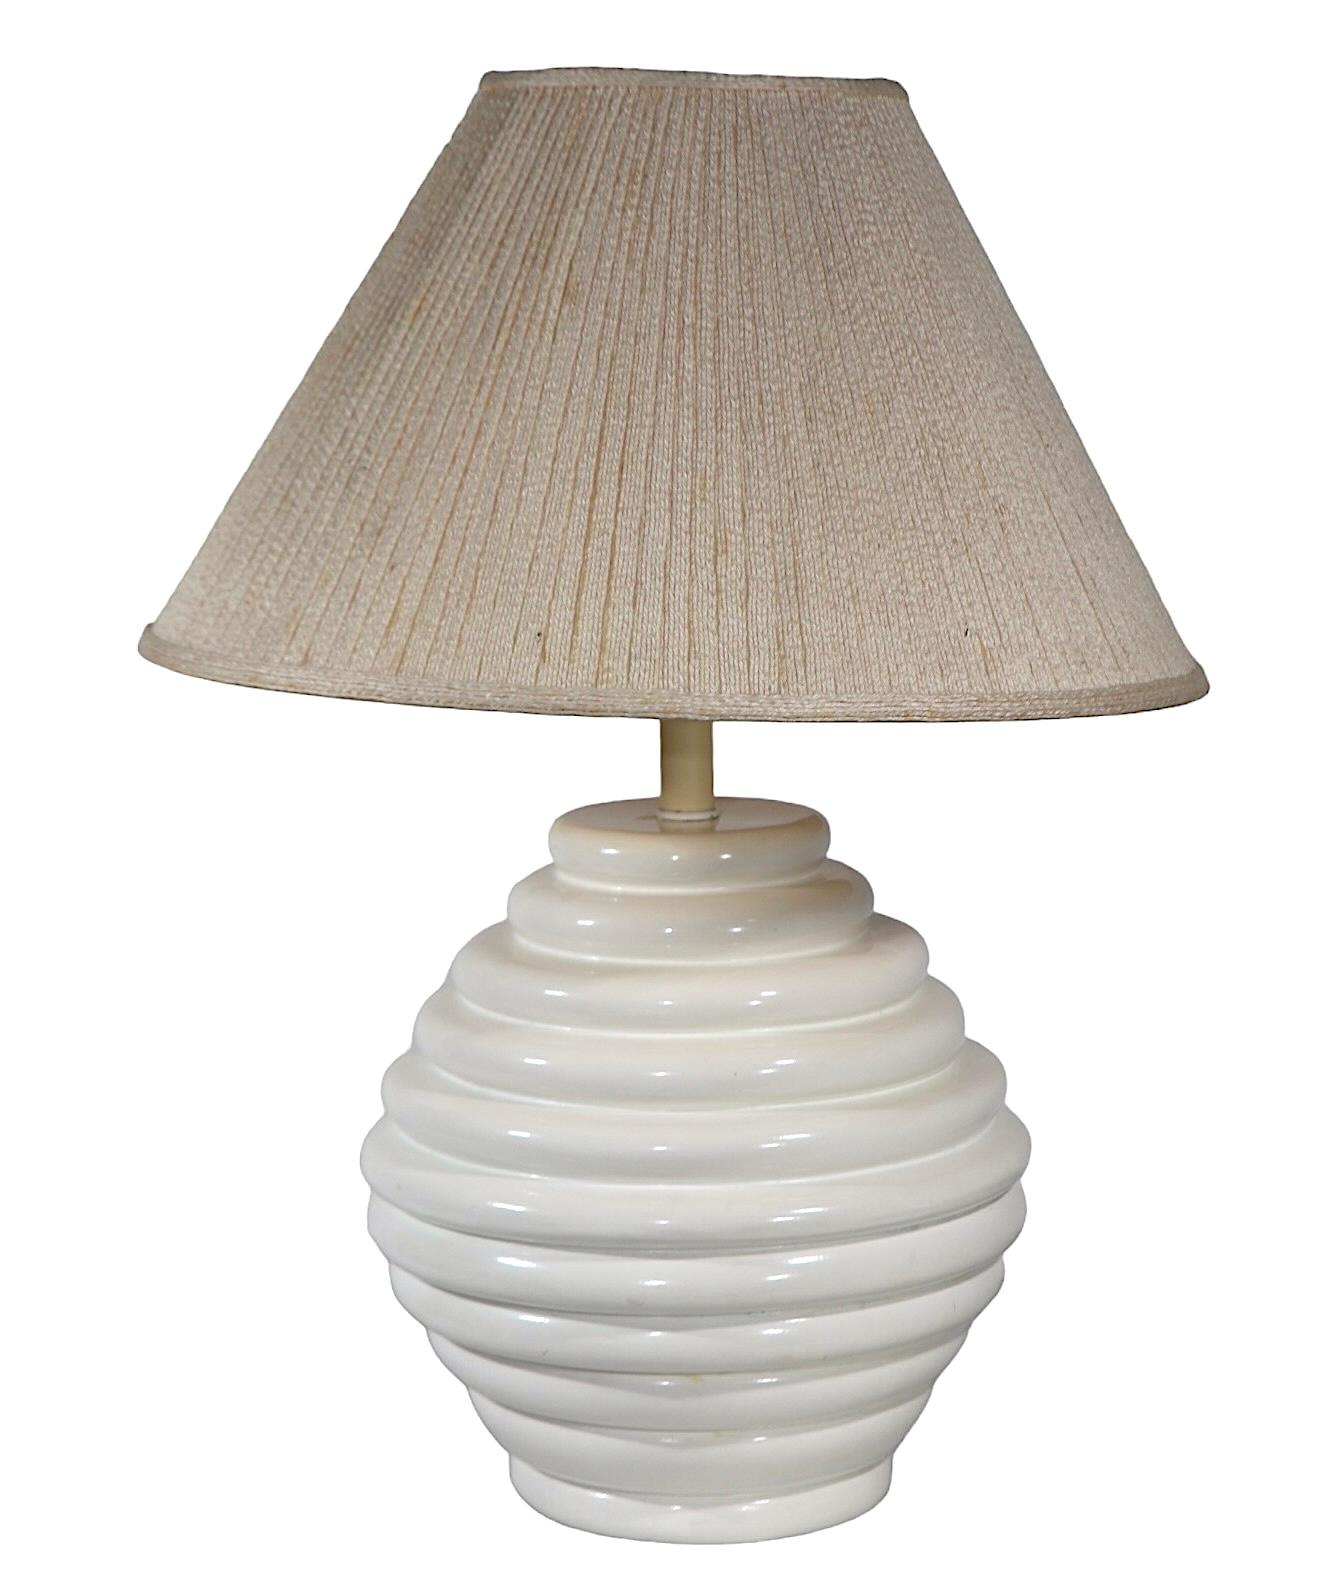 Mid-Century Modern Pr. Mid Century Space Age Bulbous Form Table Lamps in White Finish c. 1950/70's For Sale